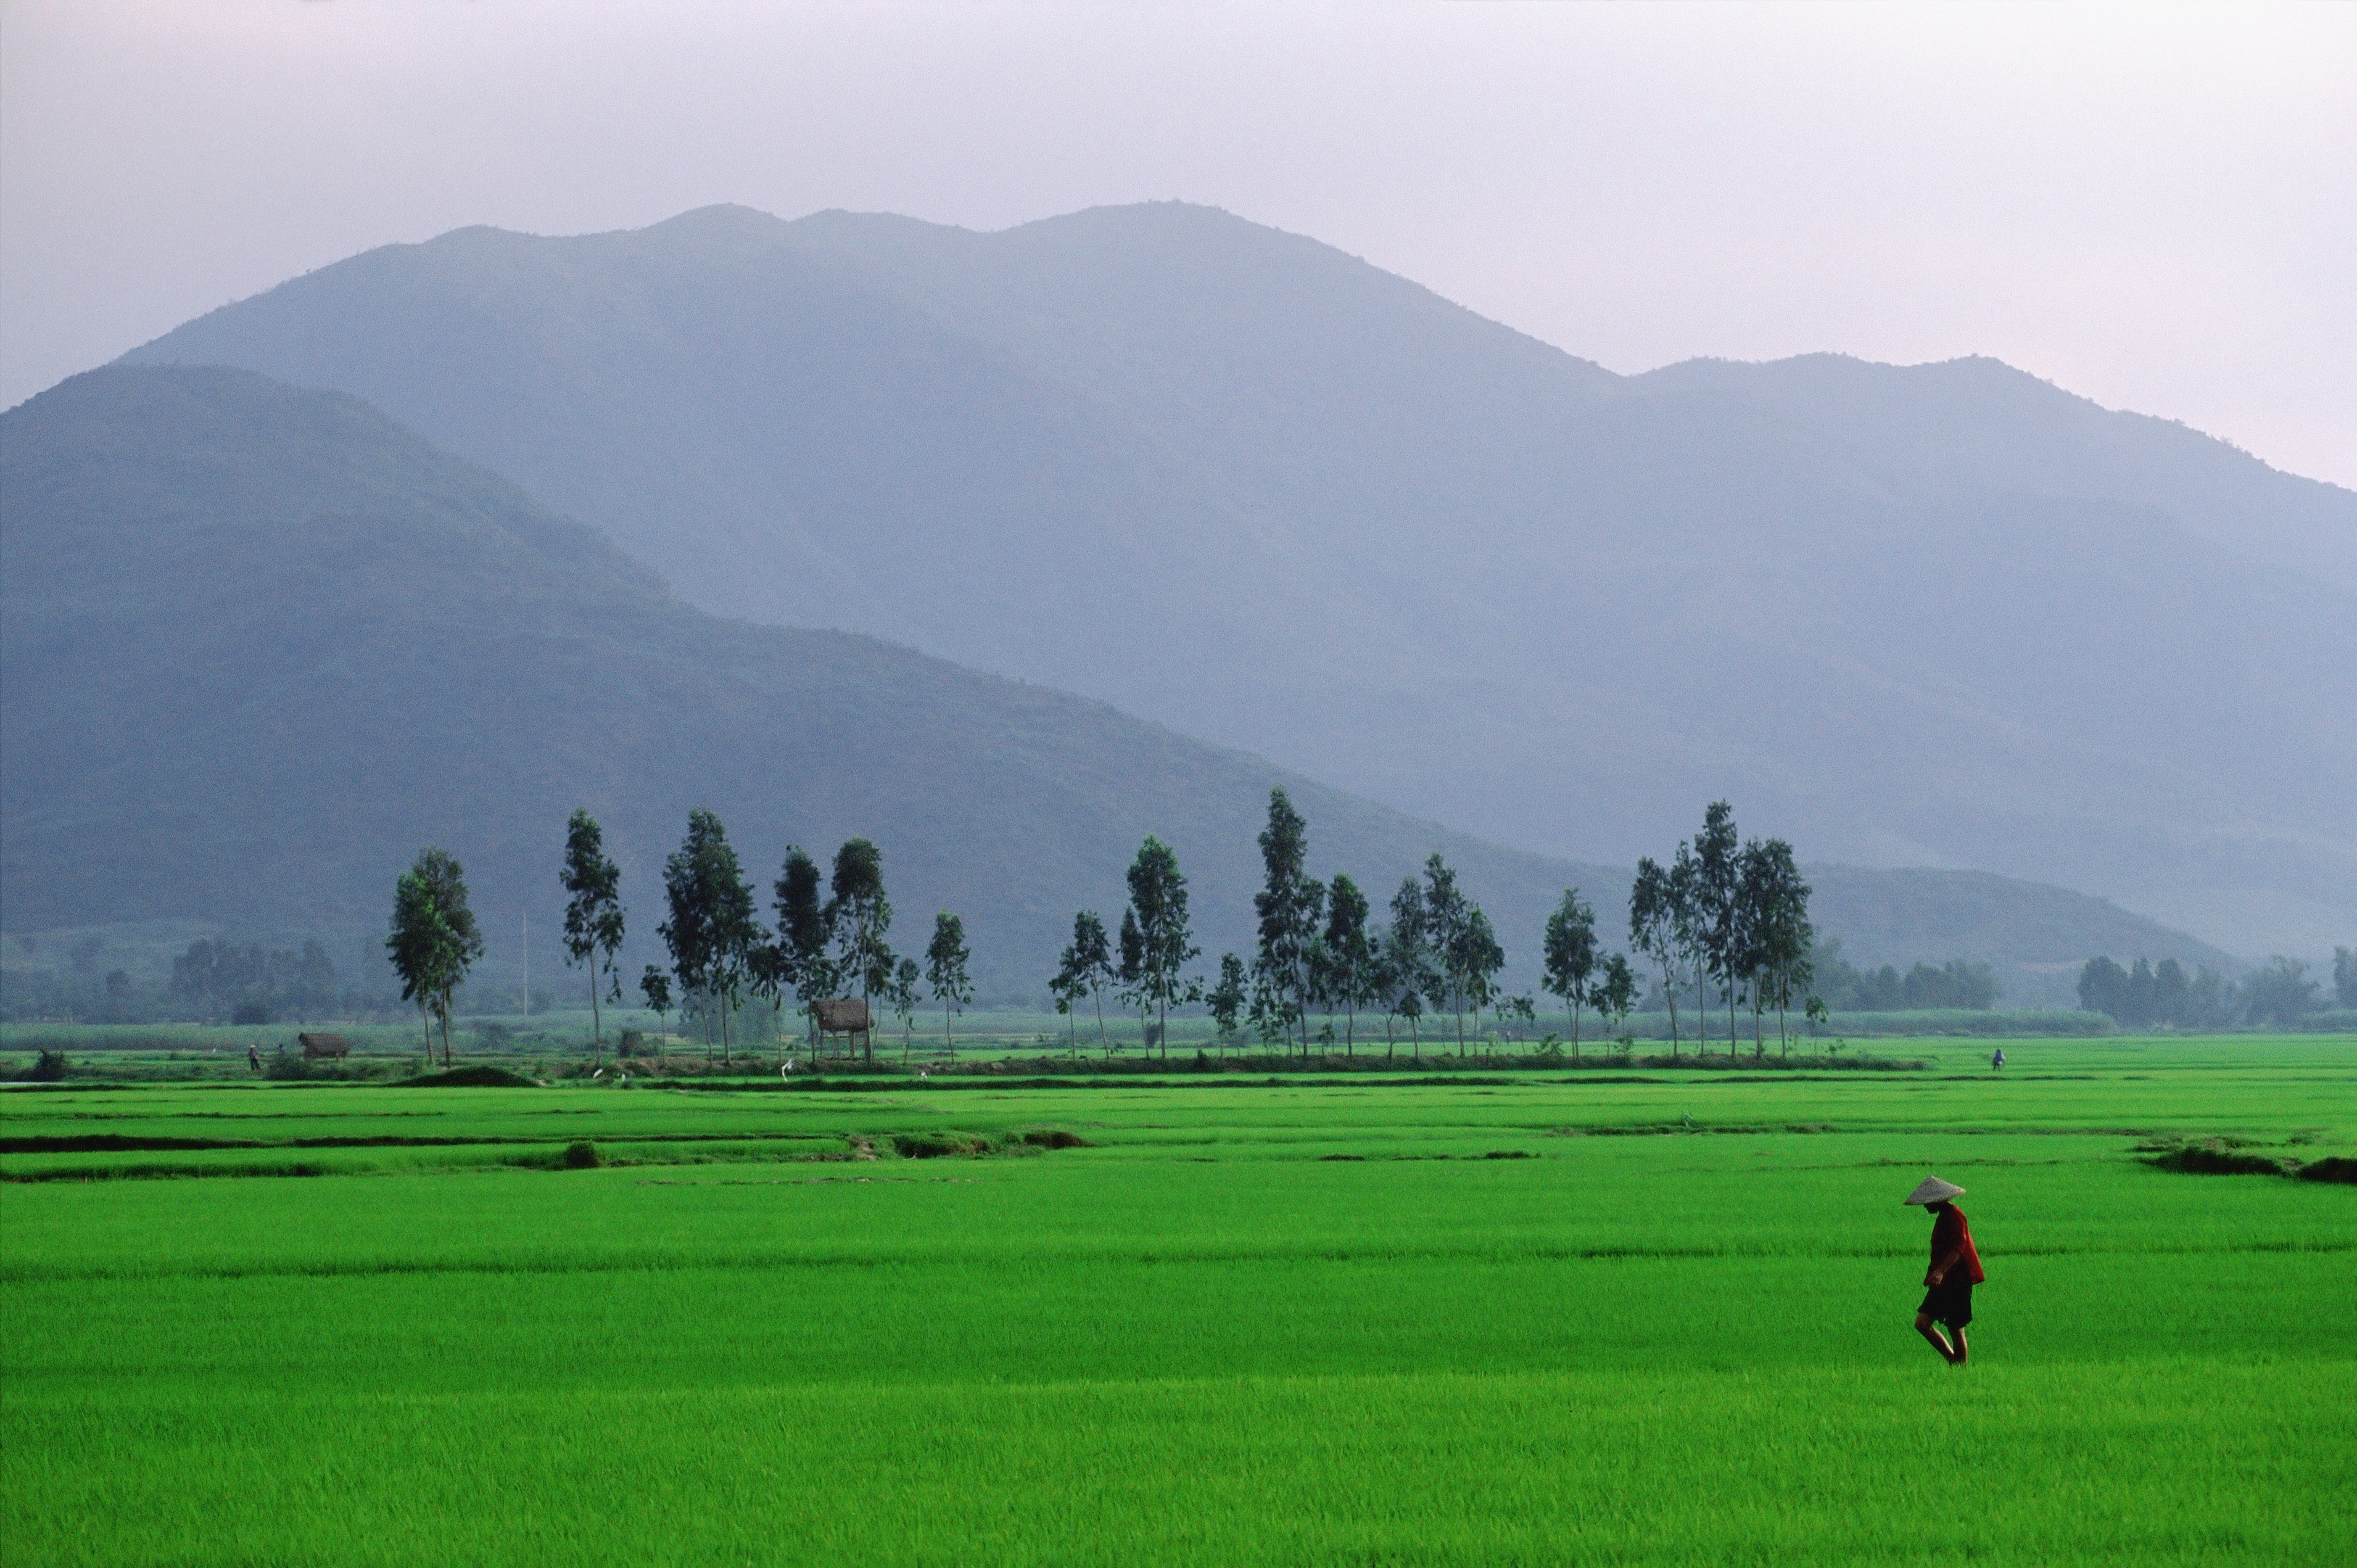 Rice paddies near Quy Nhon, Central Vietnam, with the Truong Son Mountains in the background. Photo: Alamy